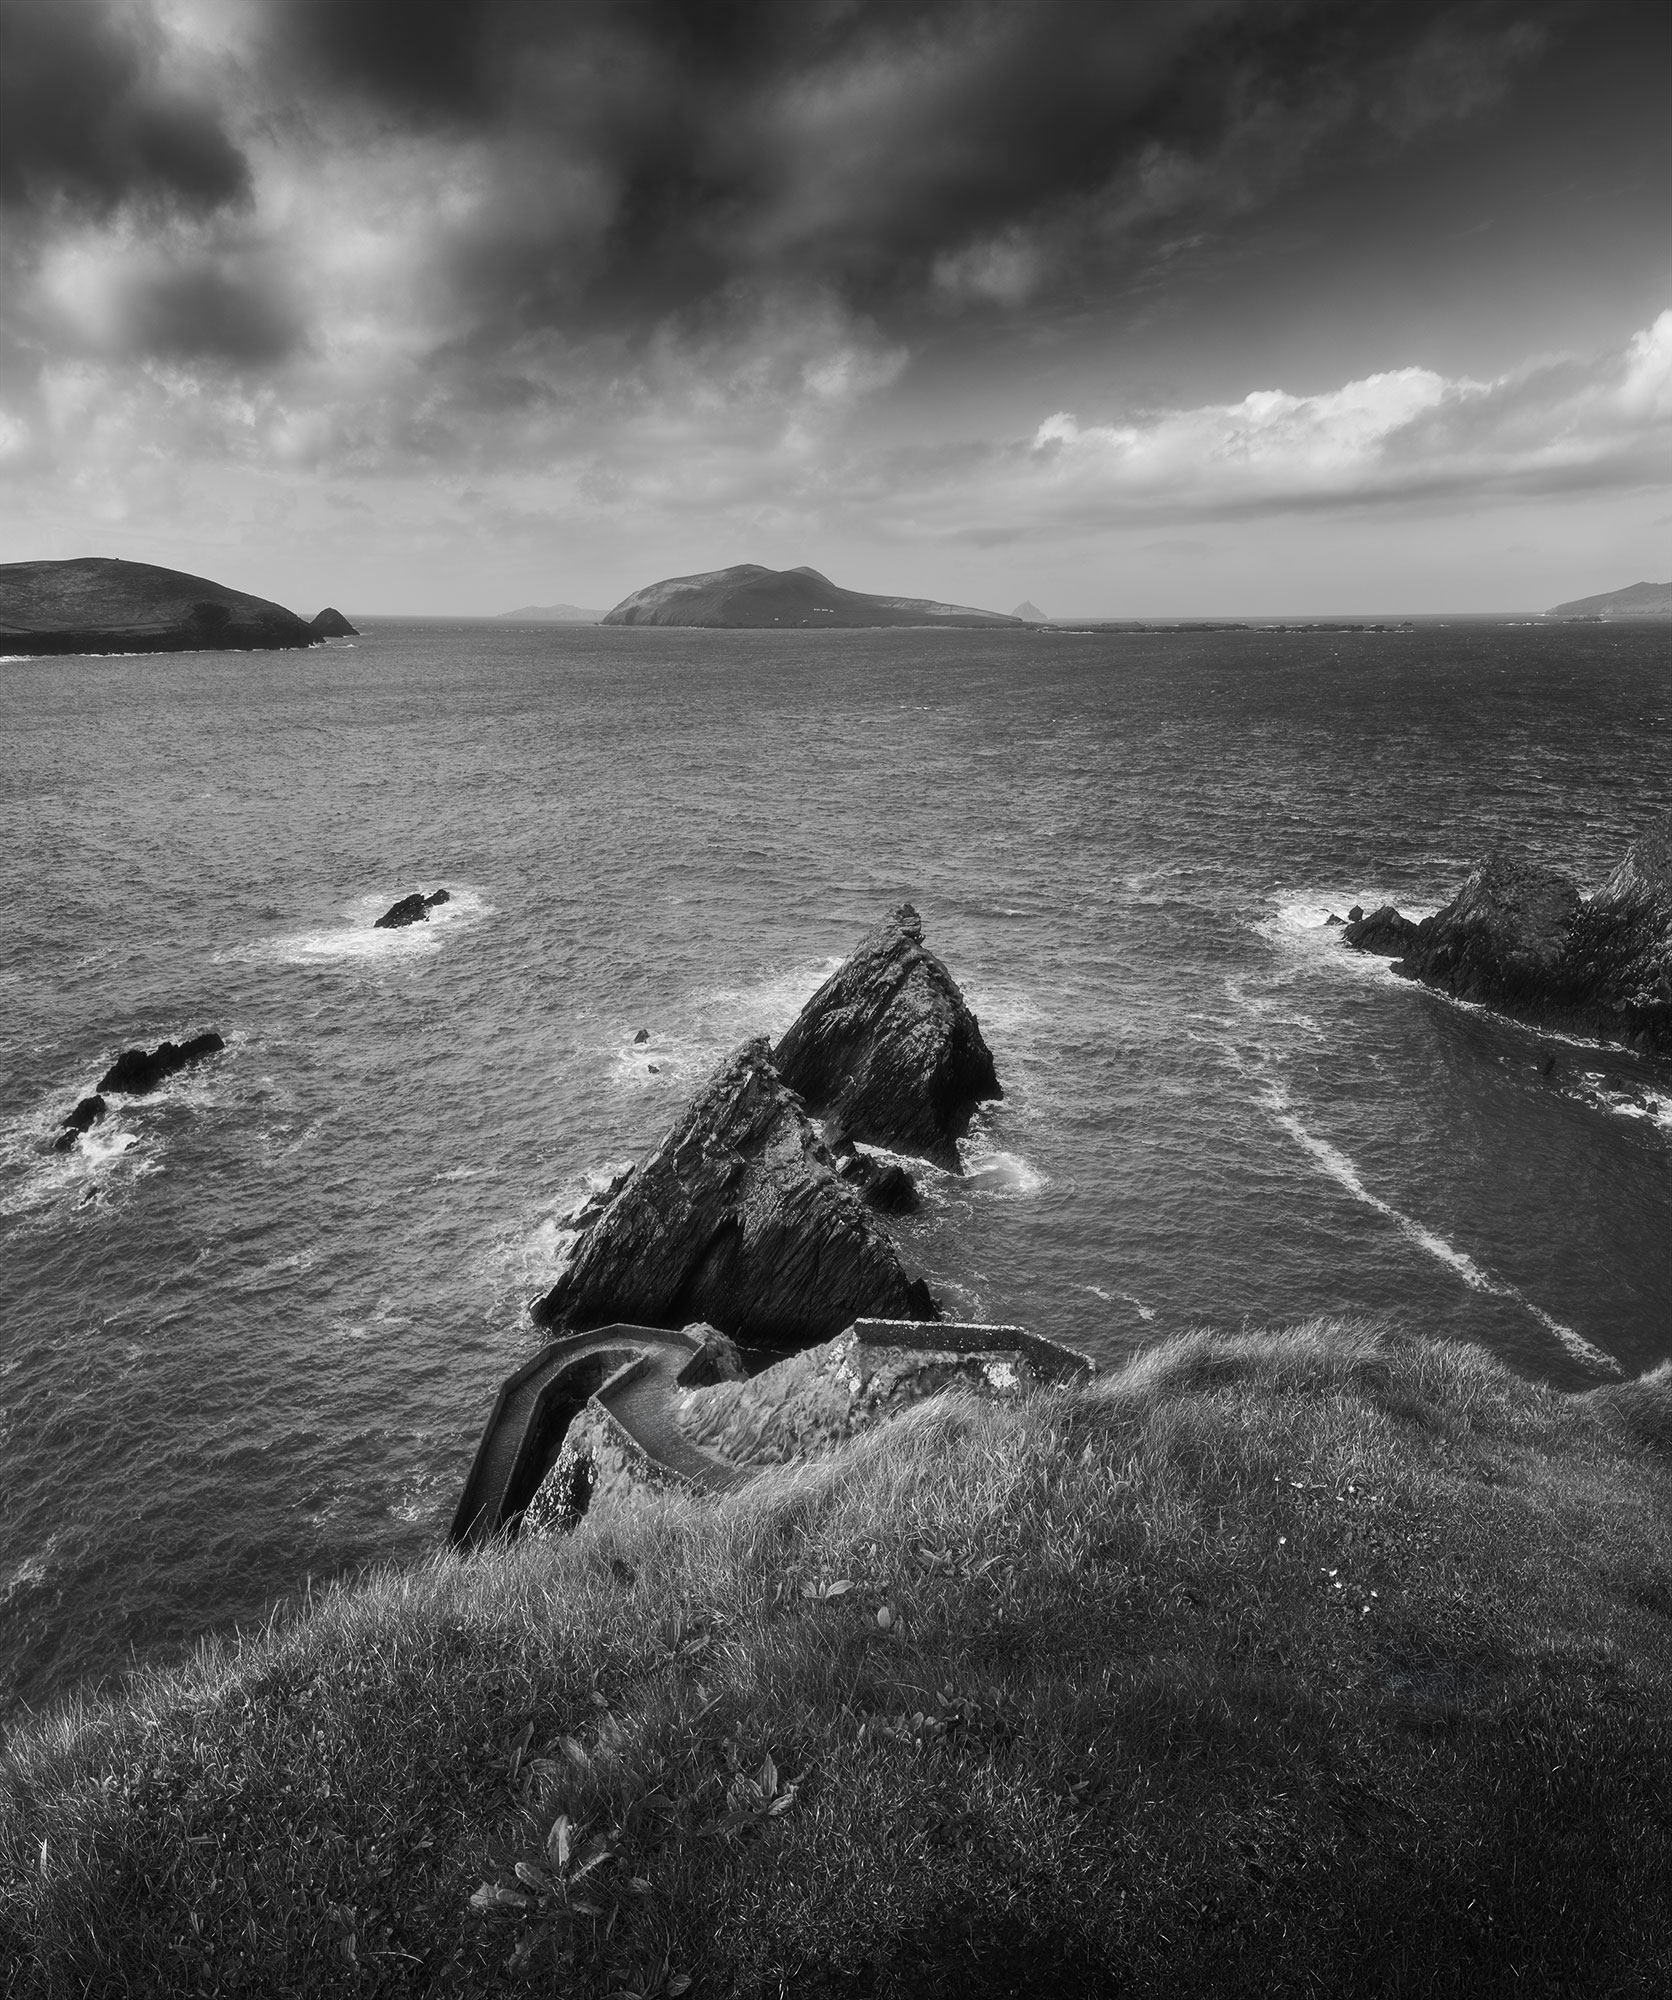 This striking black and white landscape photograph captures the timeless beauty of Dunquin Pier (Cé Dhún Chaoin) on the rugged Dingle Peninsula along the Wild Atlantic Way in Ireland. Taken by photographer Jennifer Esseiva using her Nikon Z8, the image employs a long exposure technique to evoke a sense of tranquility amidst the crashing waves. The contrast between light and shadow accentuates the dramatic contours of the pier, inviting viewers to contemplate the raw essence of this iconic Irish coastal landmark.